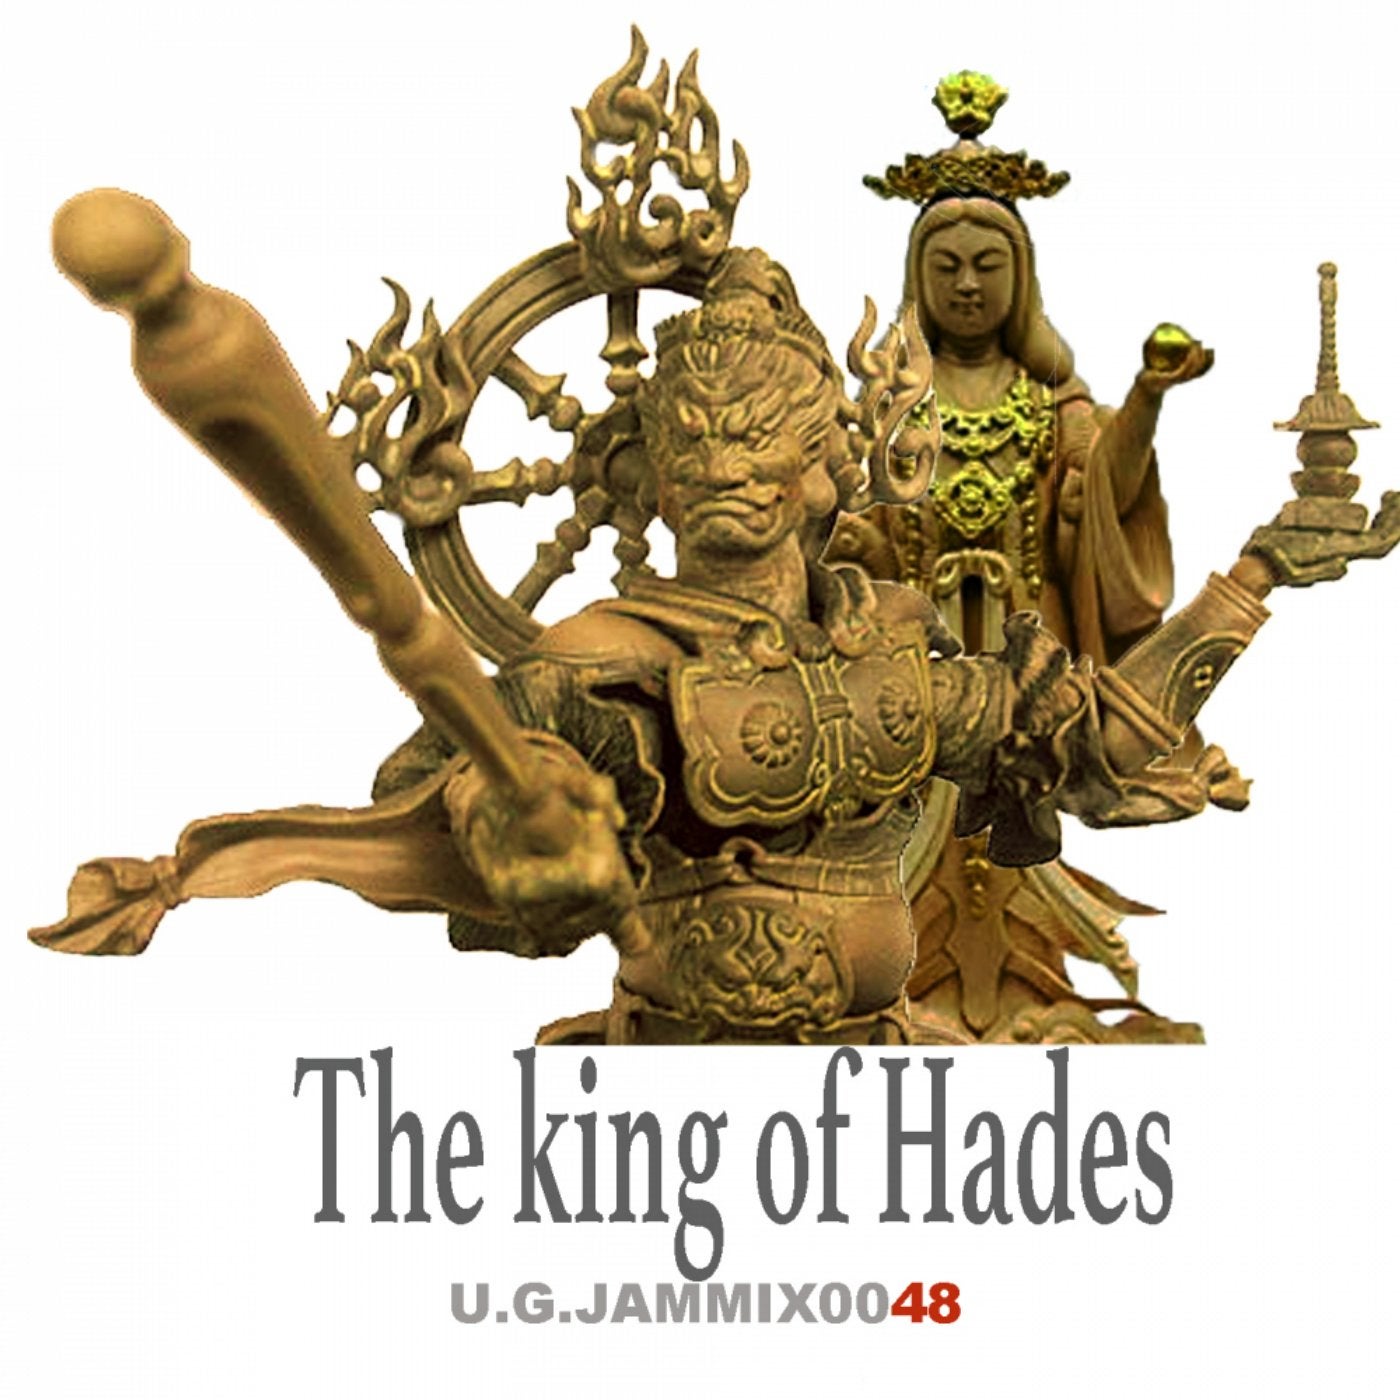 The king of Hades